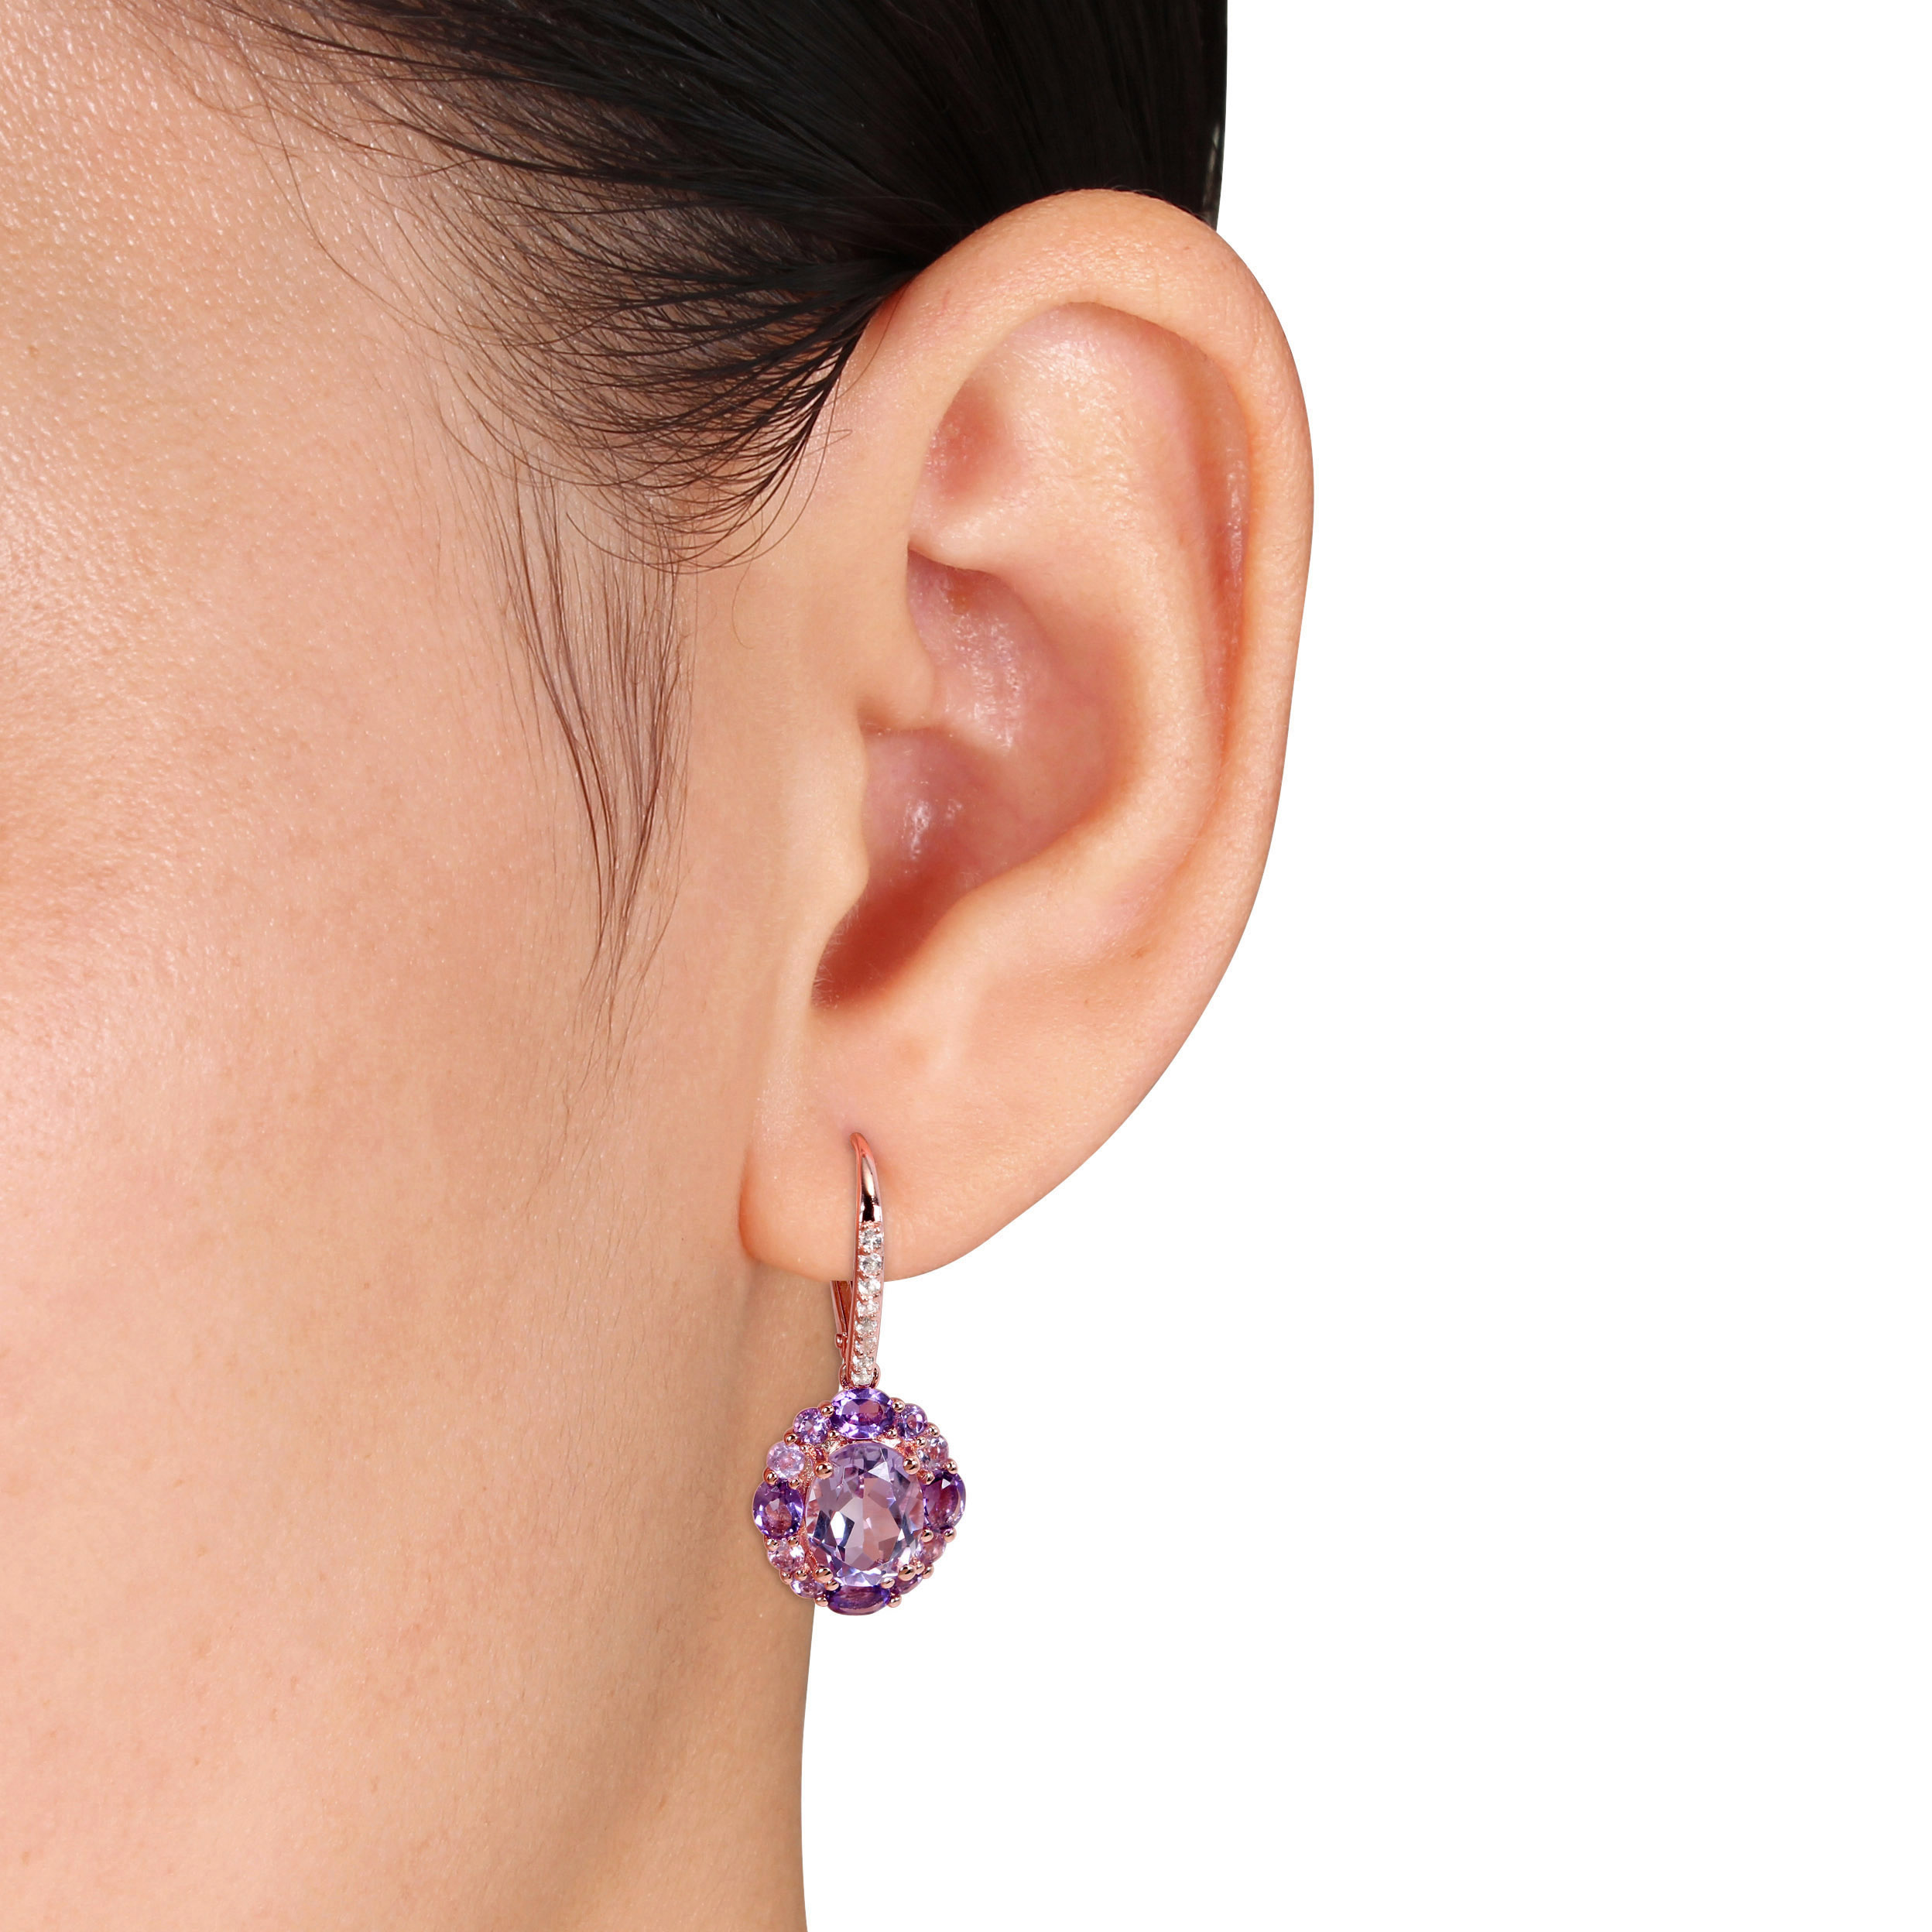 5 1/2 CT TGW Amethyst, White Topaz and Rose de France Floral Leverback Earrings in Rose Plated Sterling Silver